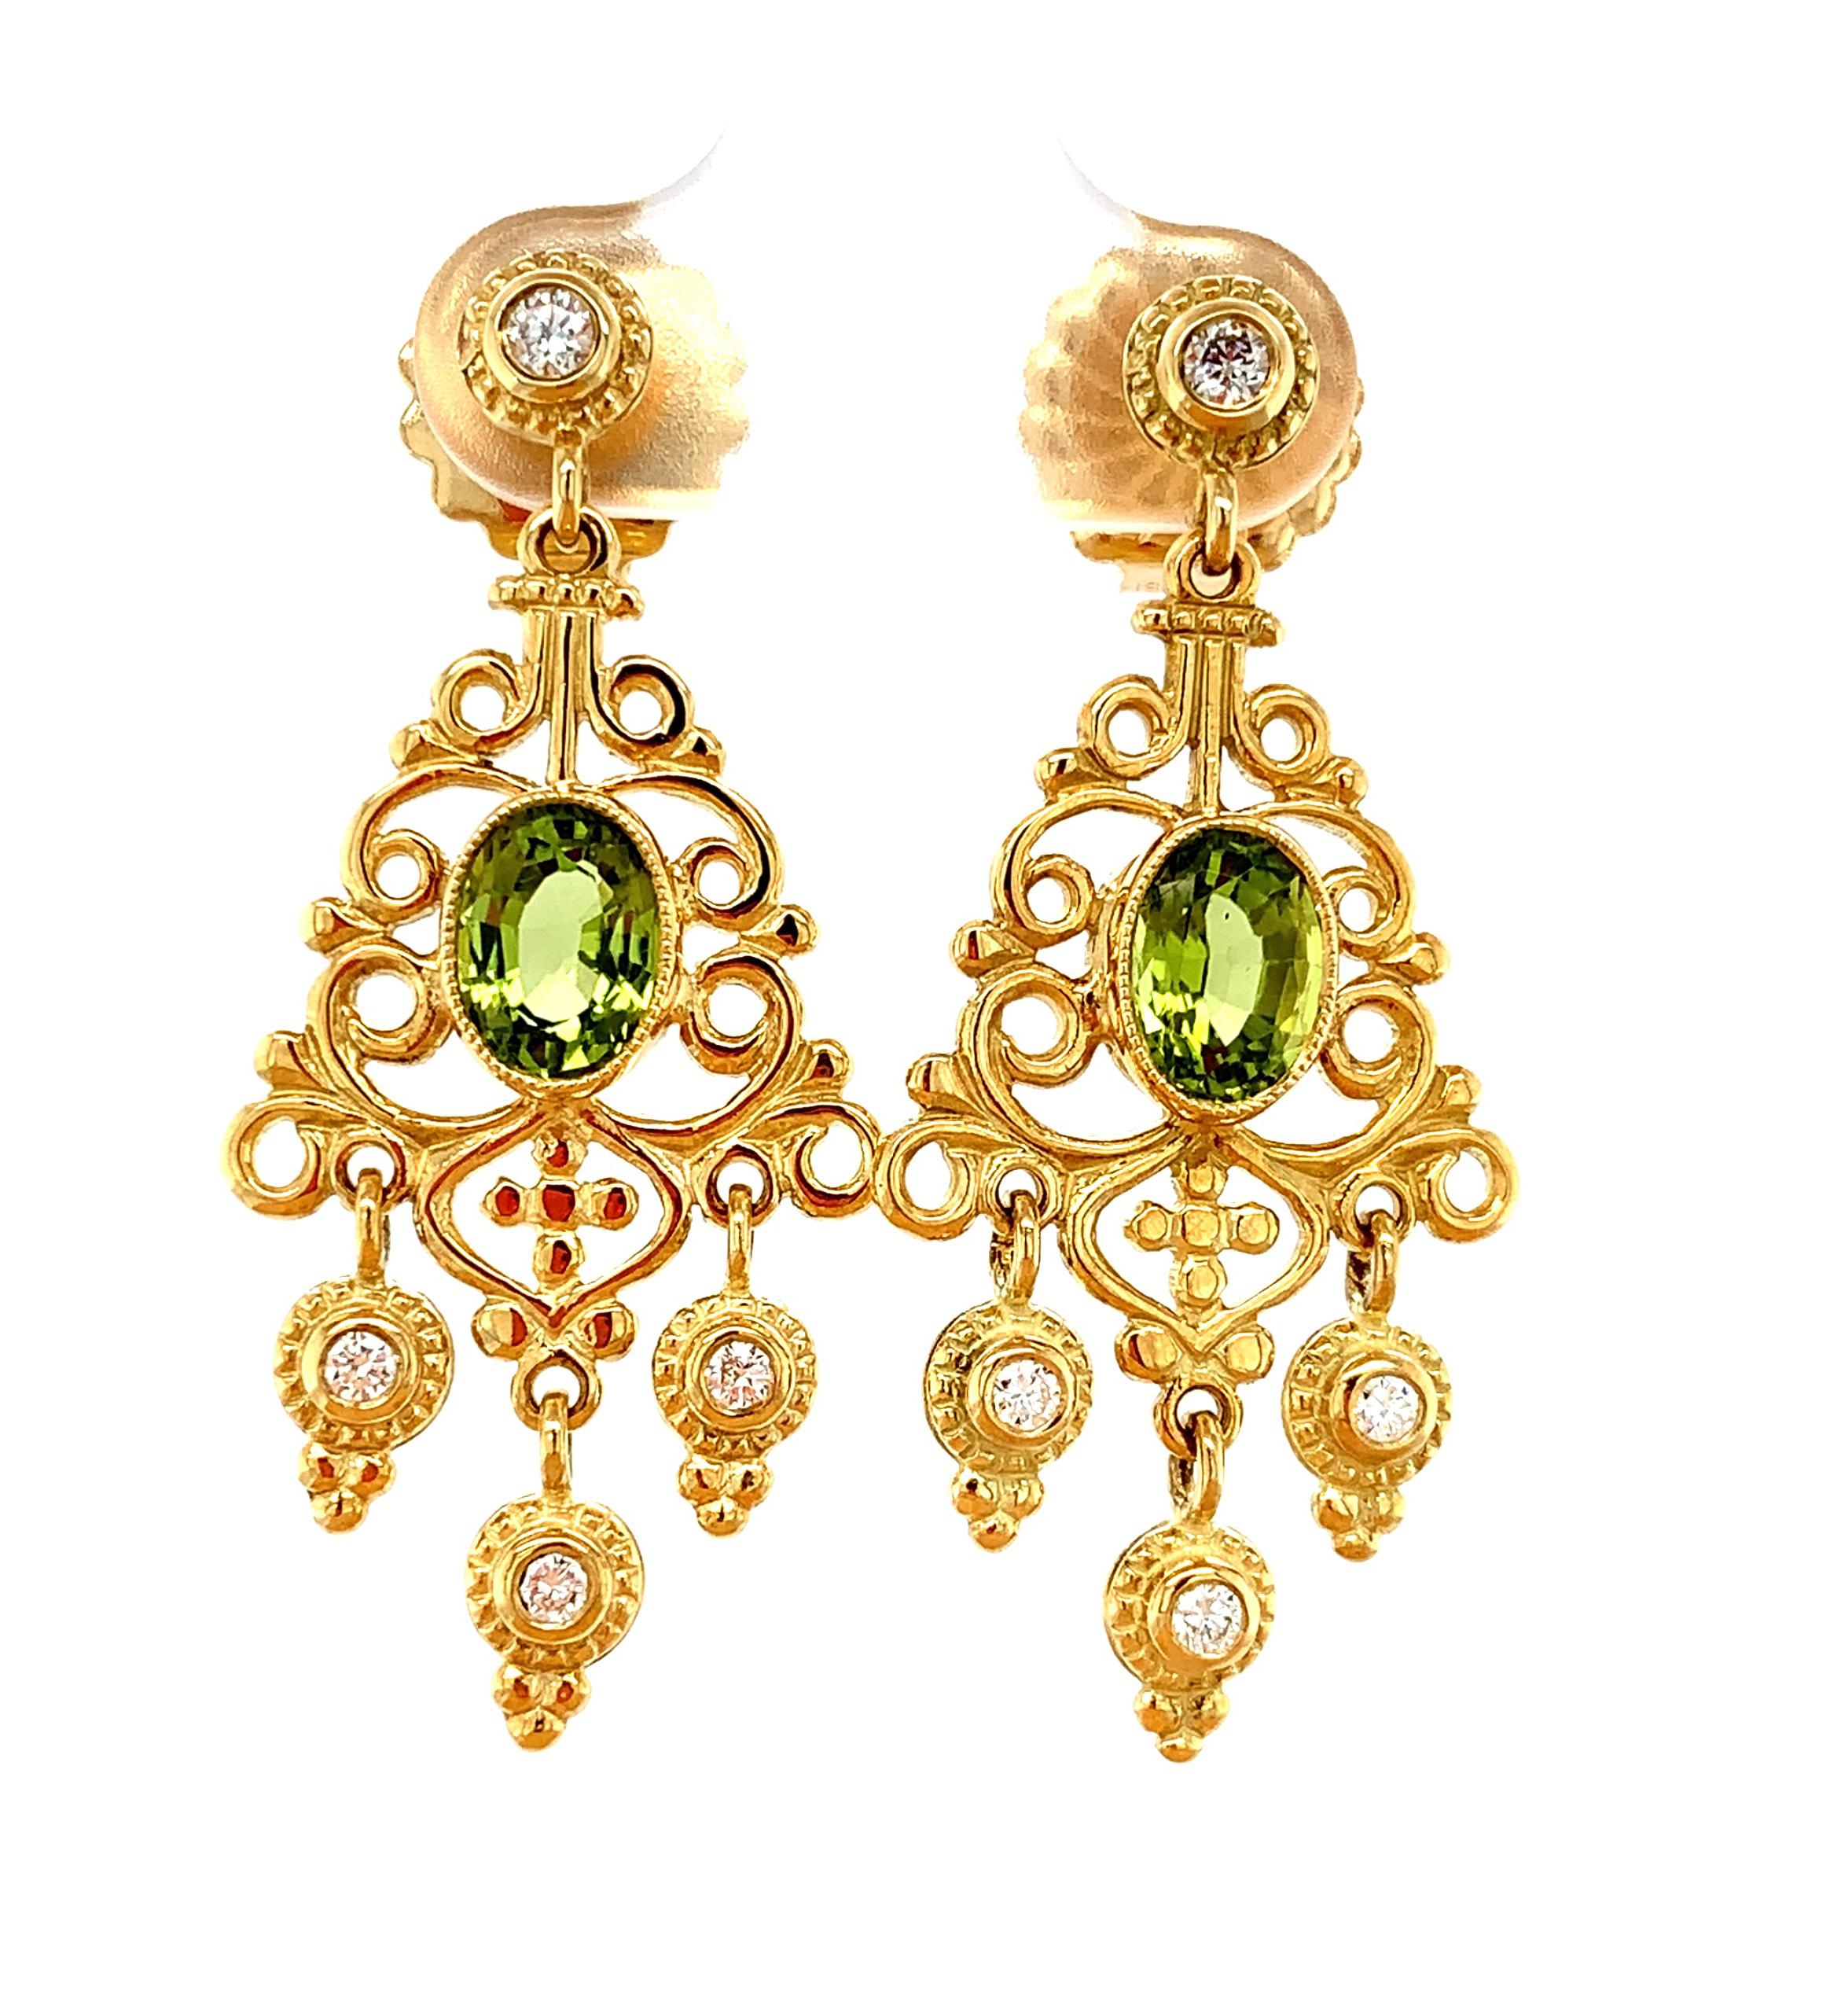 These earrings are so pretty when worn! They feature grass-green peridots and brilliant cut diamonds, set in an 18k yellow gold handmade design by our Master Jewelers in Los Angeles. These Victorian Era inspired jewels have elegant movement and